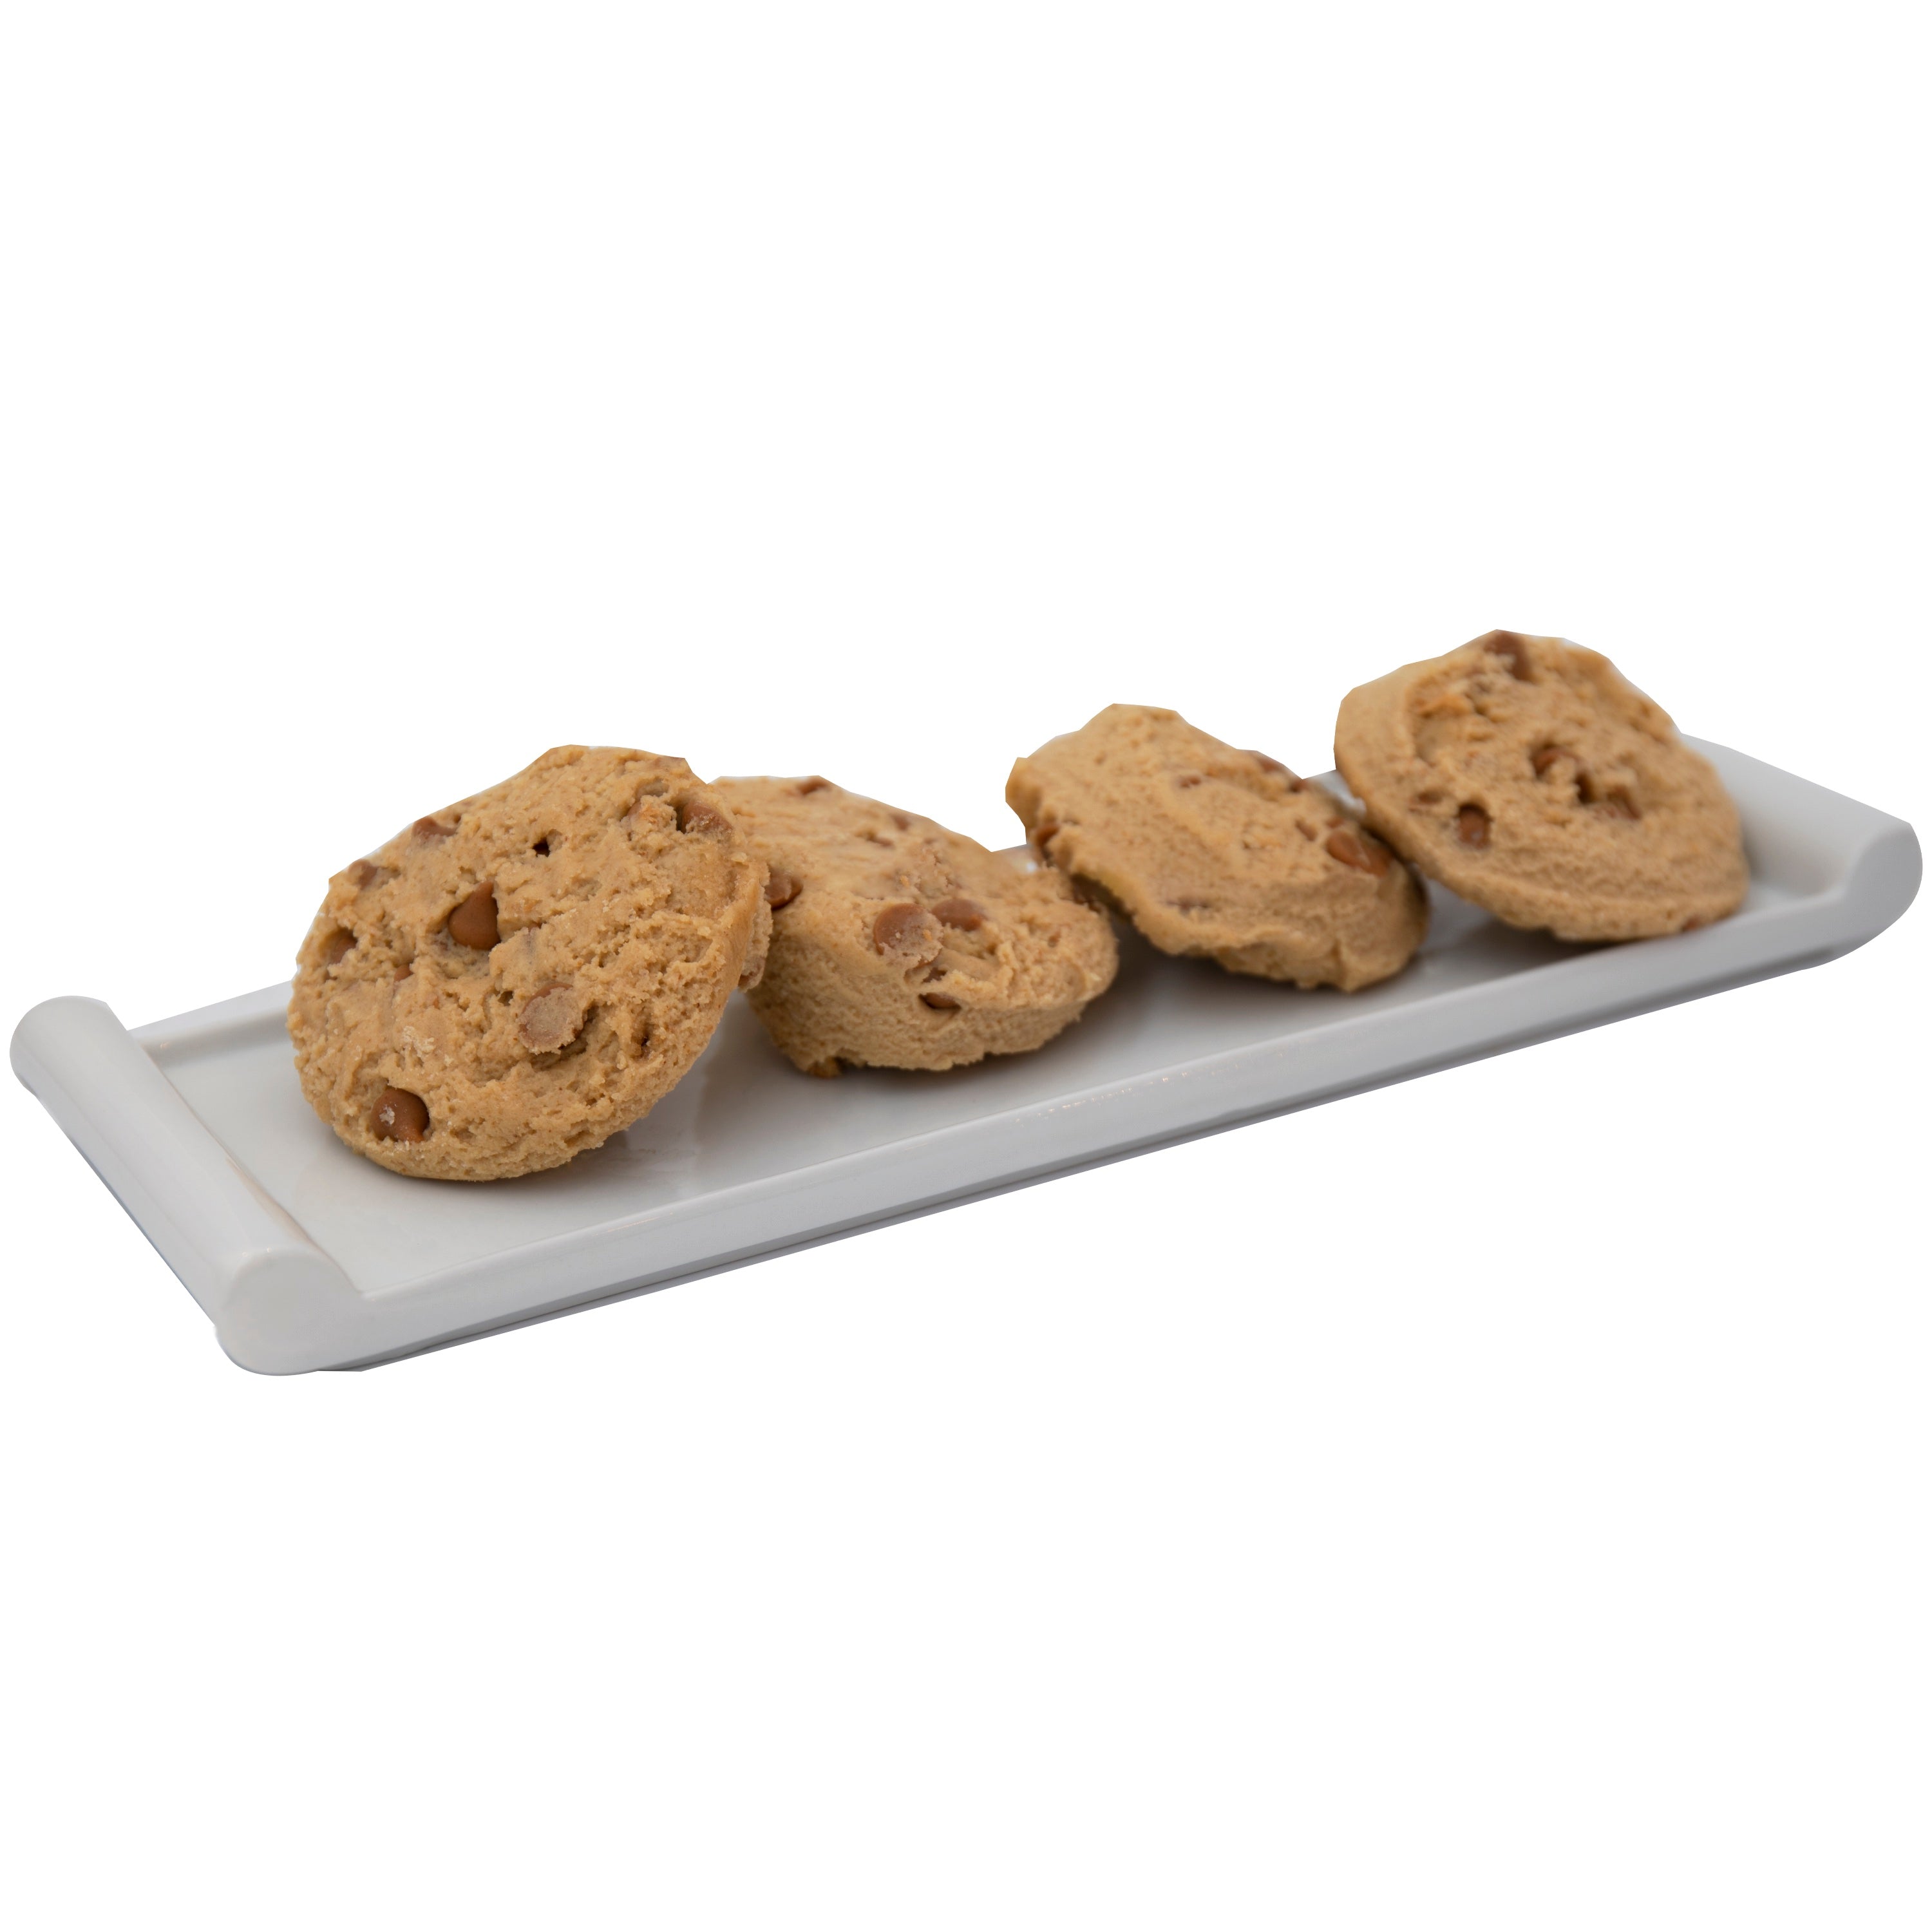 David's Cookies Preportioned Peanut Butter Cookie Dough 1.5oz